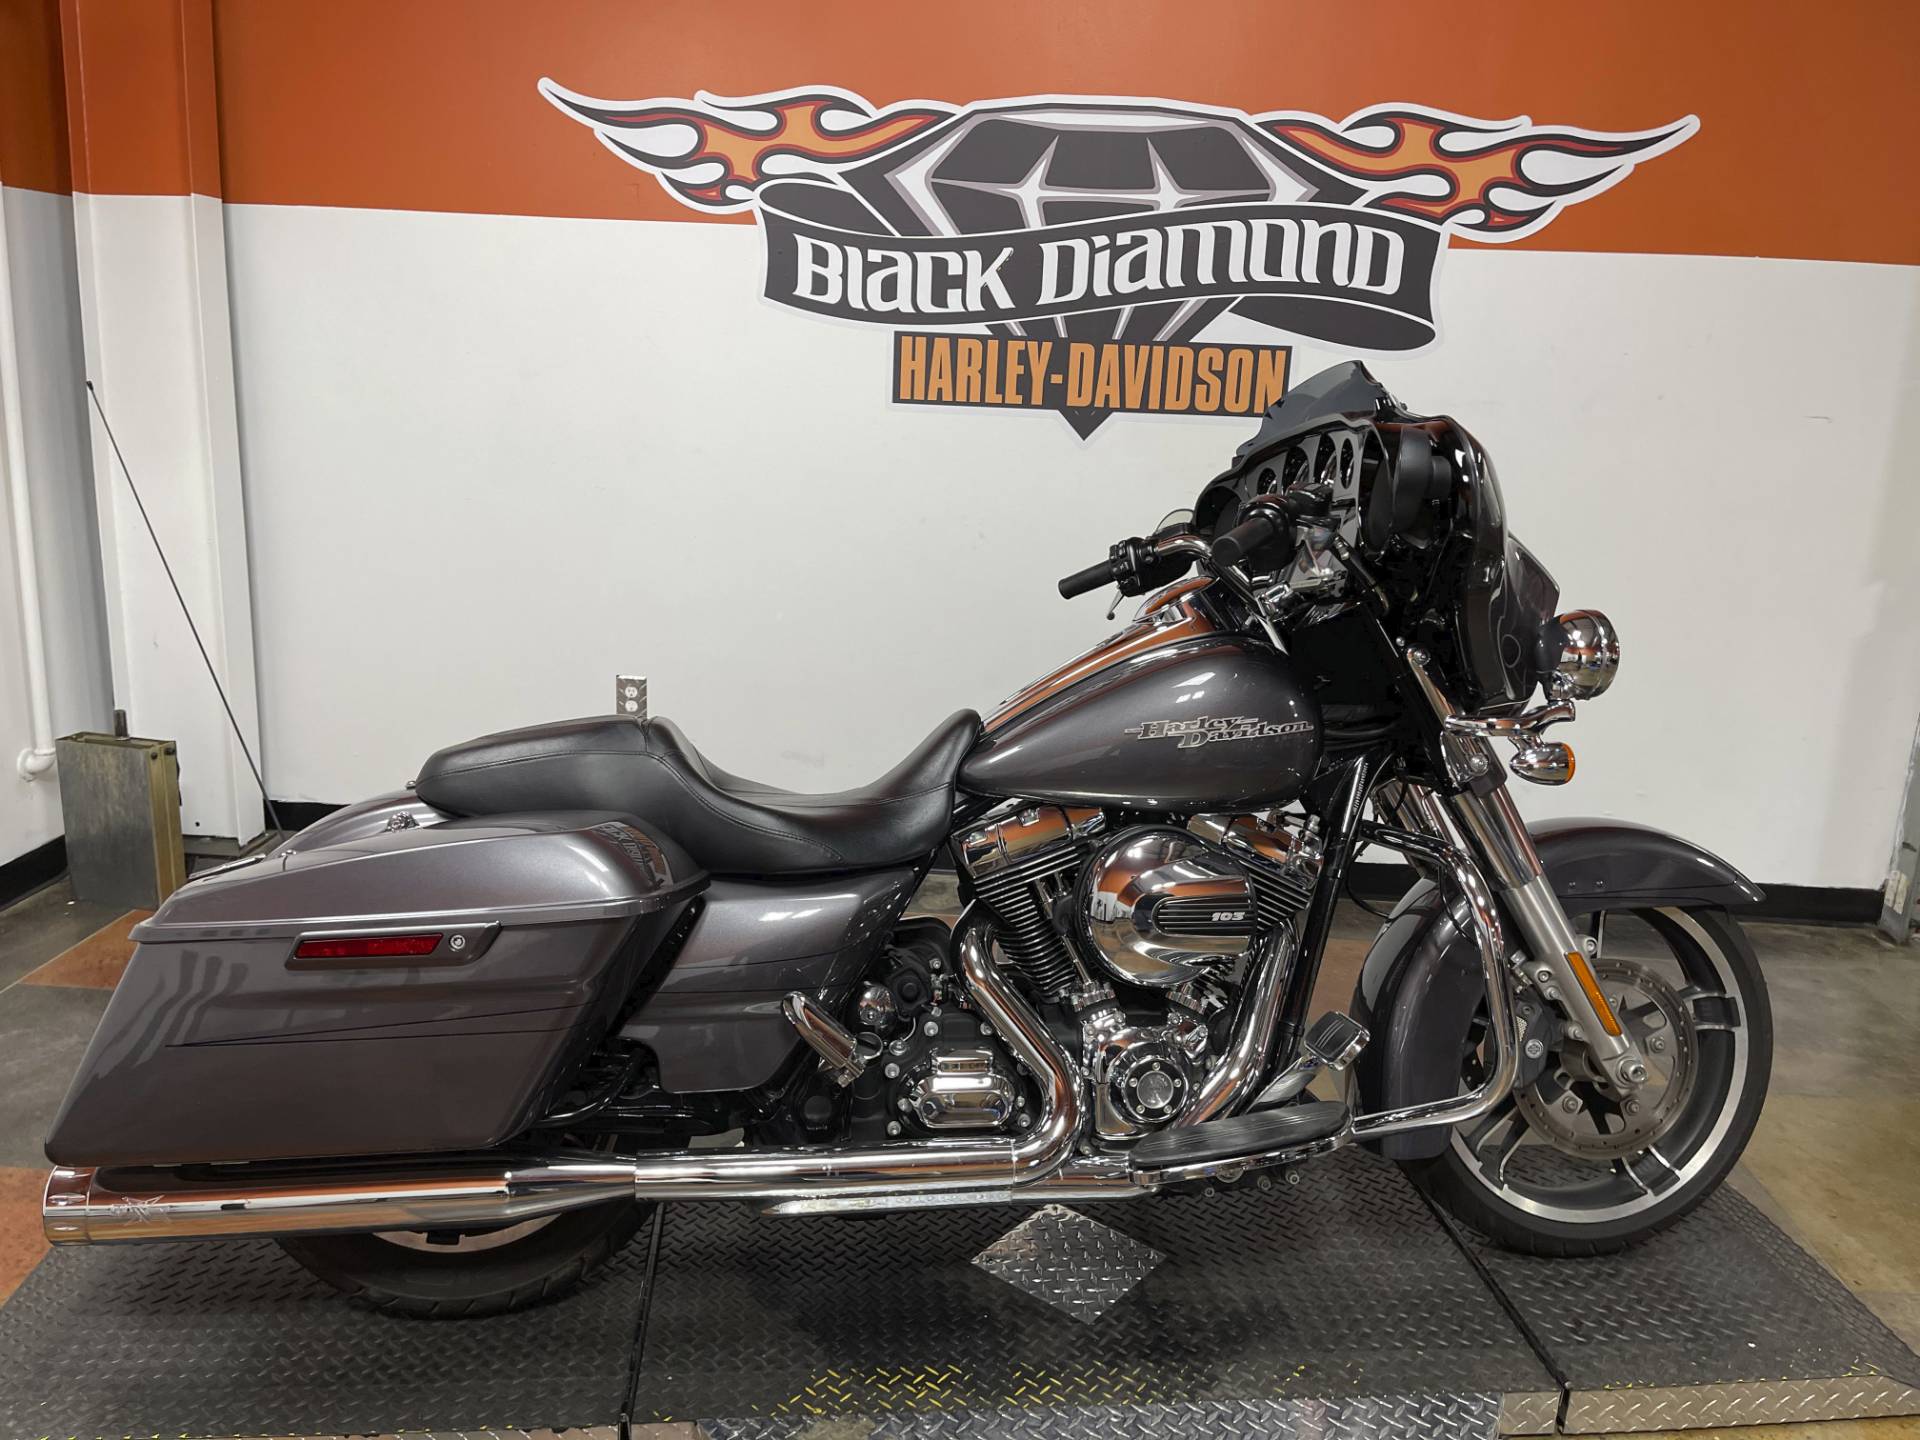 Used 2015 Harley Davidson Street Glide Special Charcoal Pearl Motorcycles In Mount Vernon Il U664775